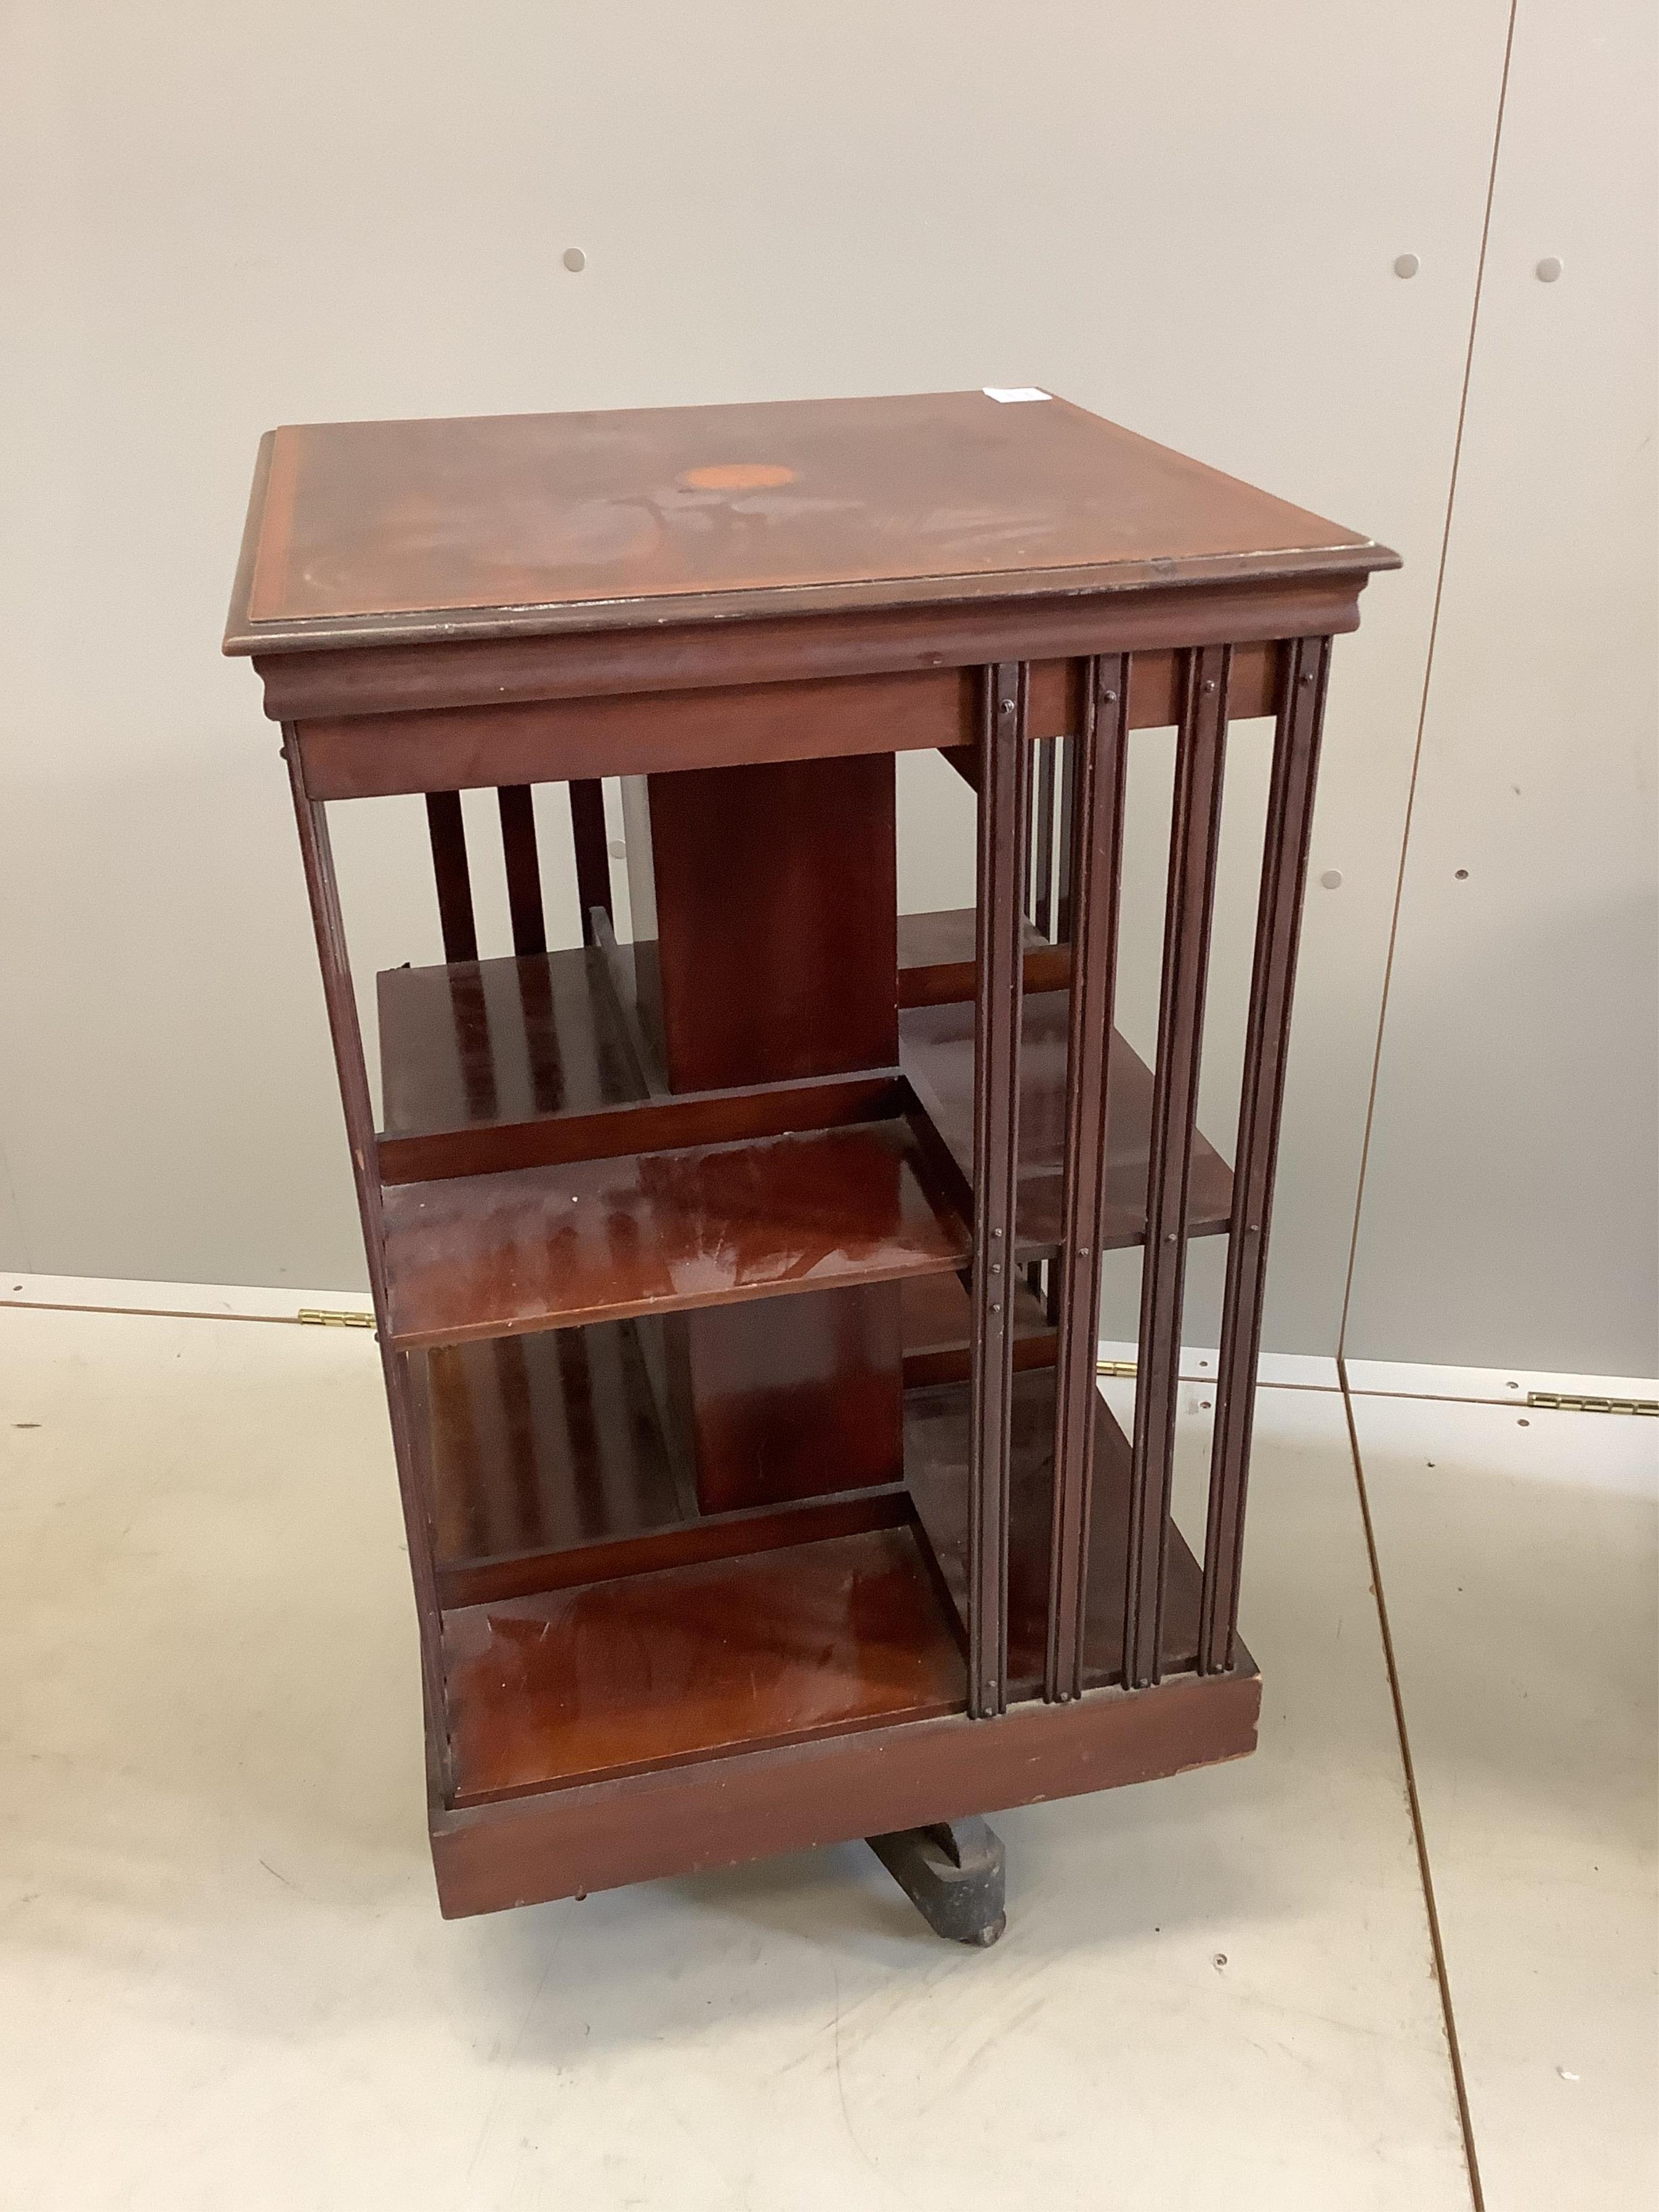 An Edwardian inlaid mahogany revolving bookcase, width 47cm, depth 47cm, height 84cm. Condition - poor